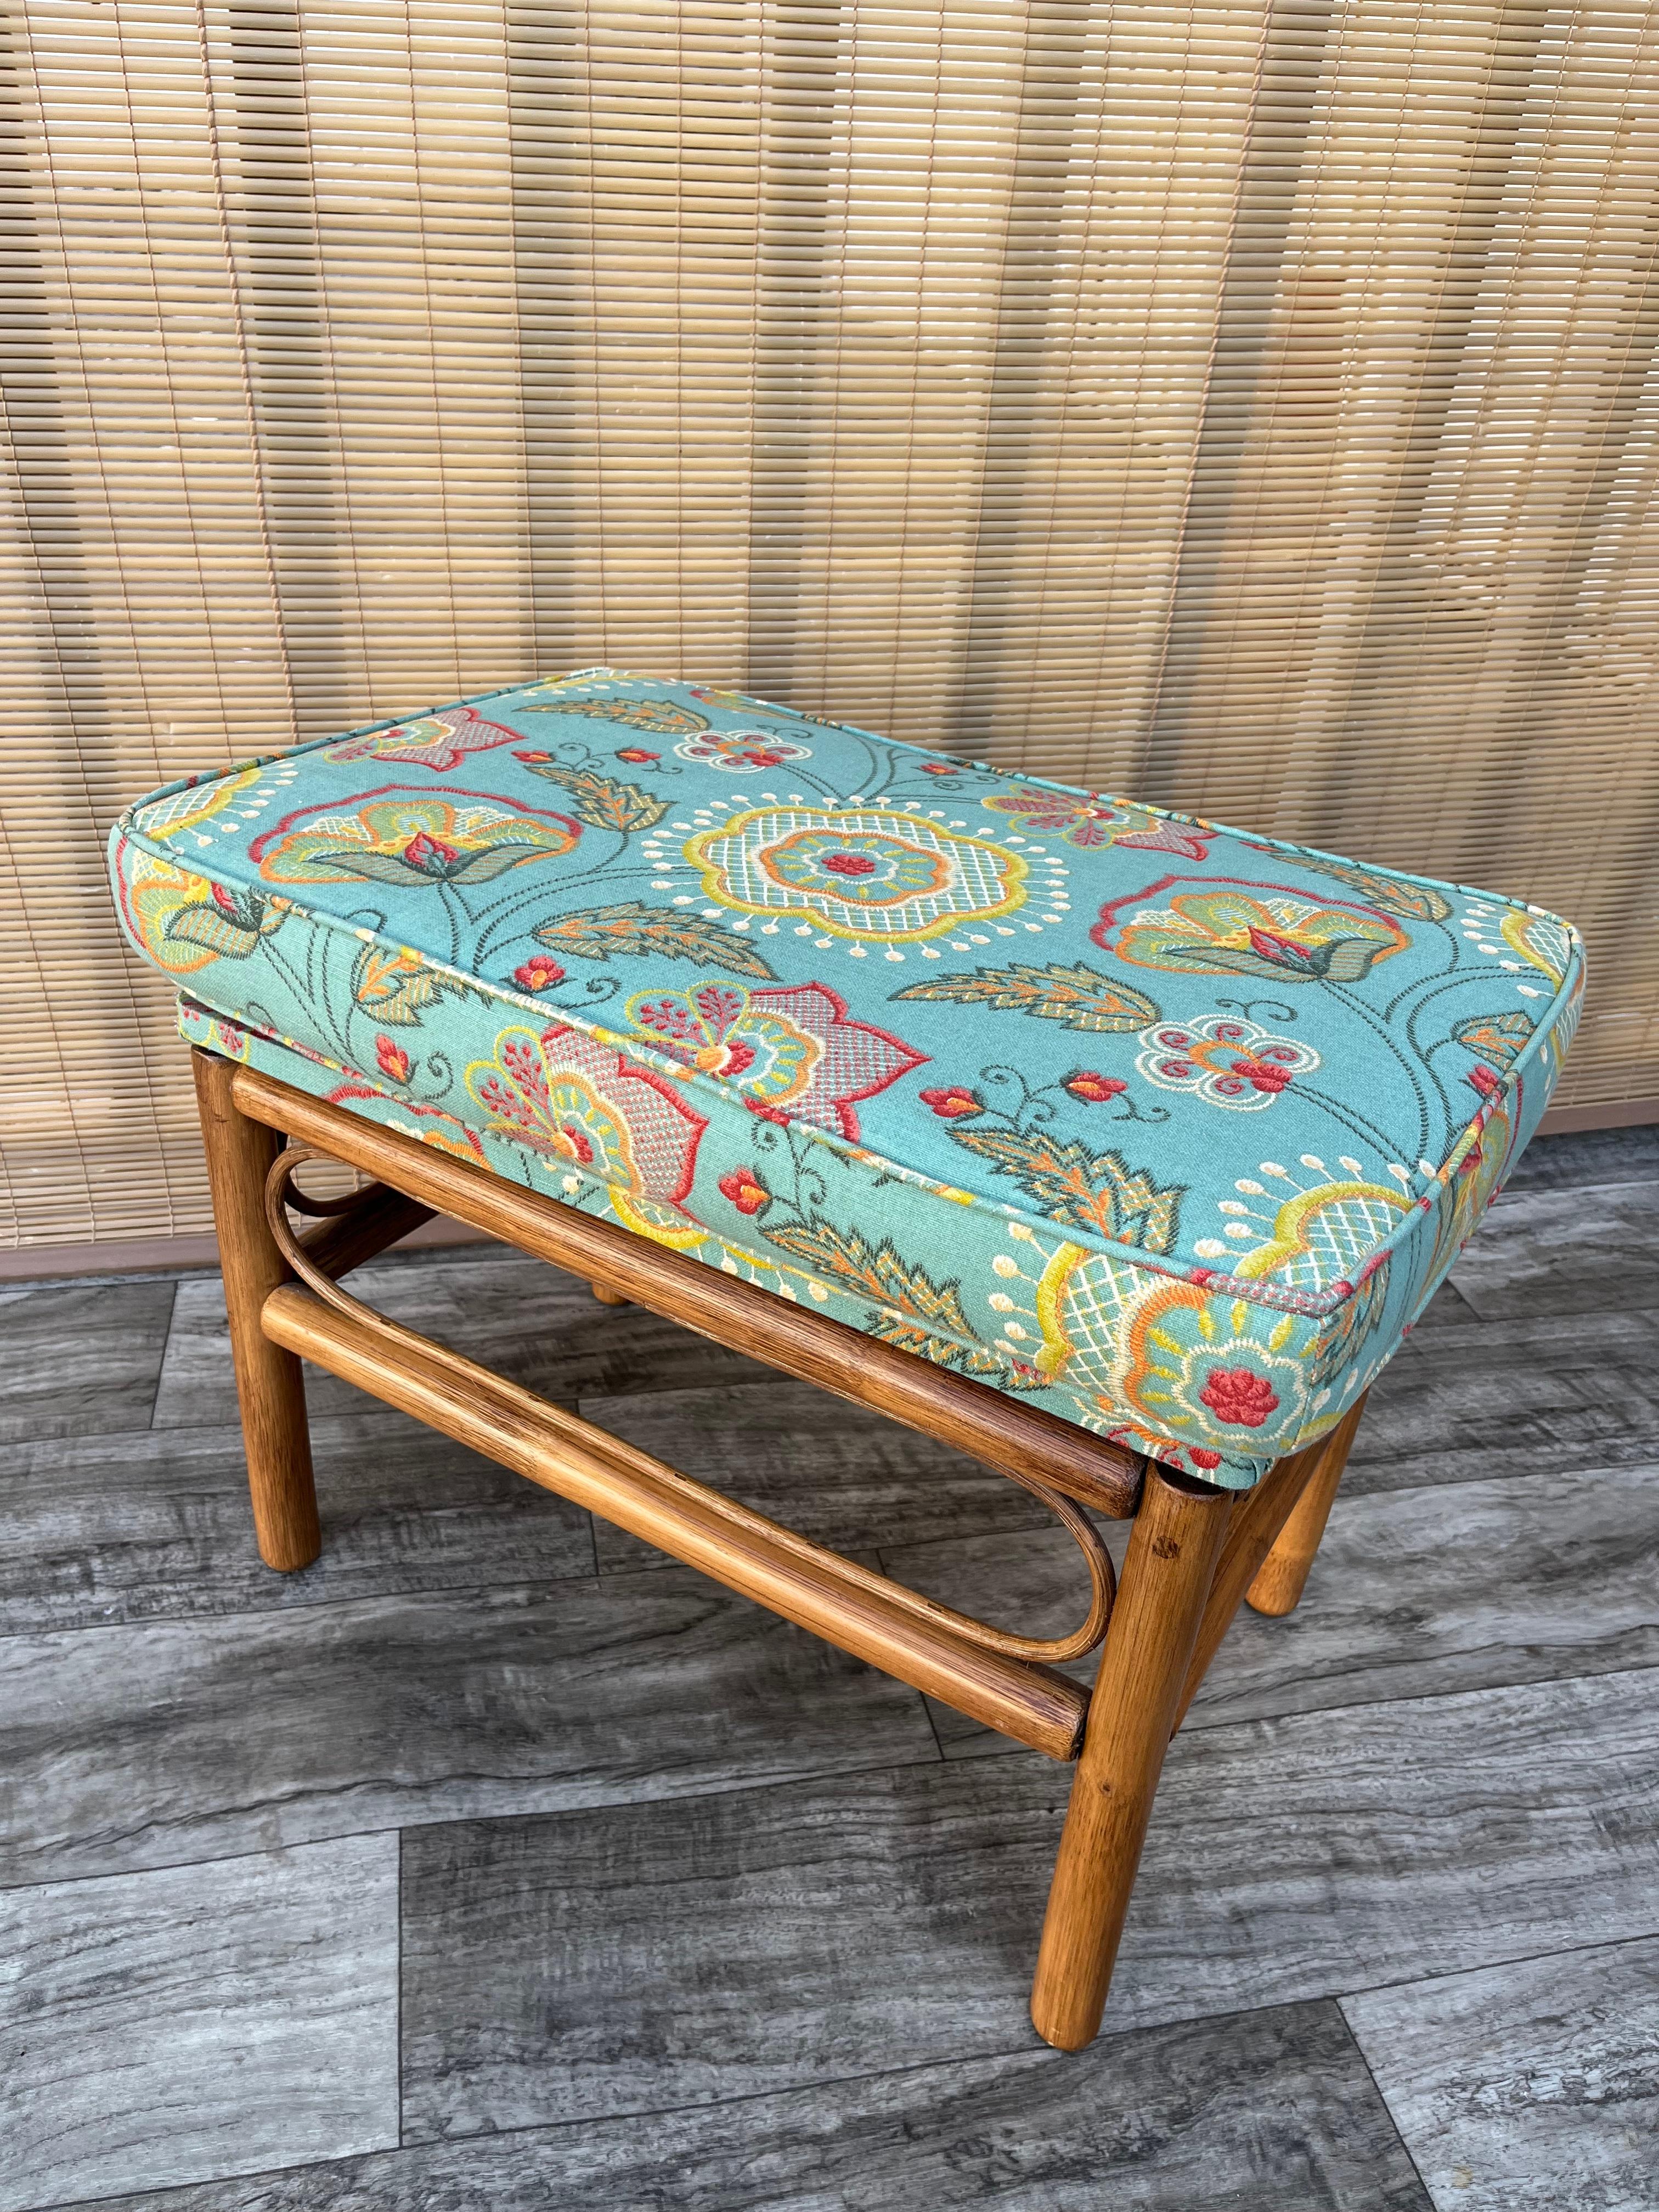 American Vintage Coastal Style, Boho Chic Rattan Ottoman / Accent Bench For Sale